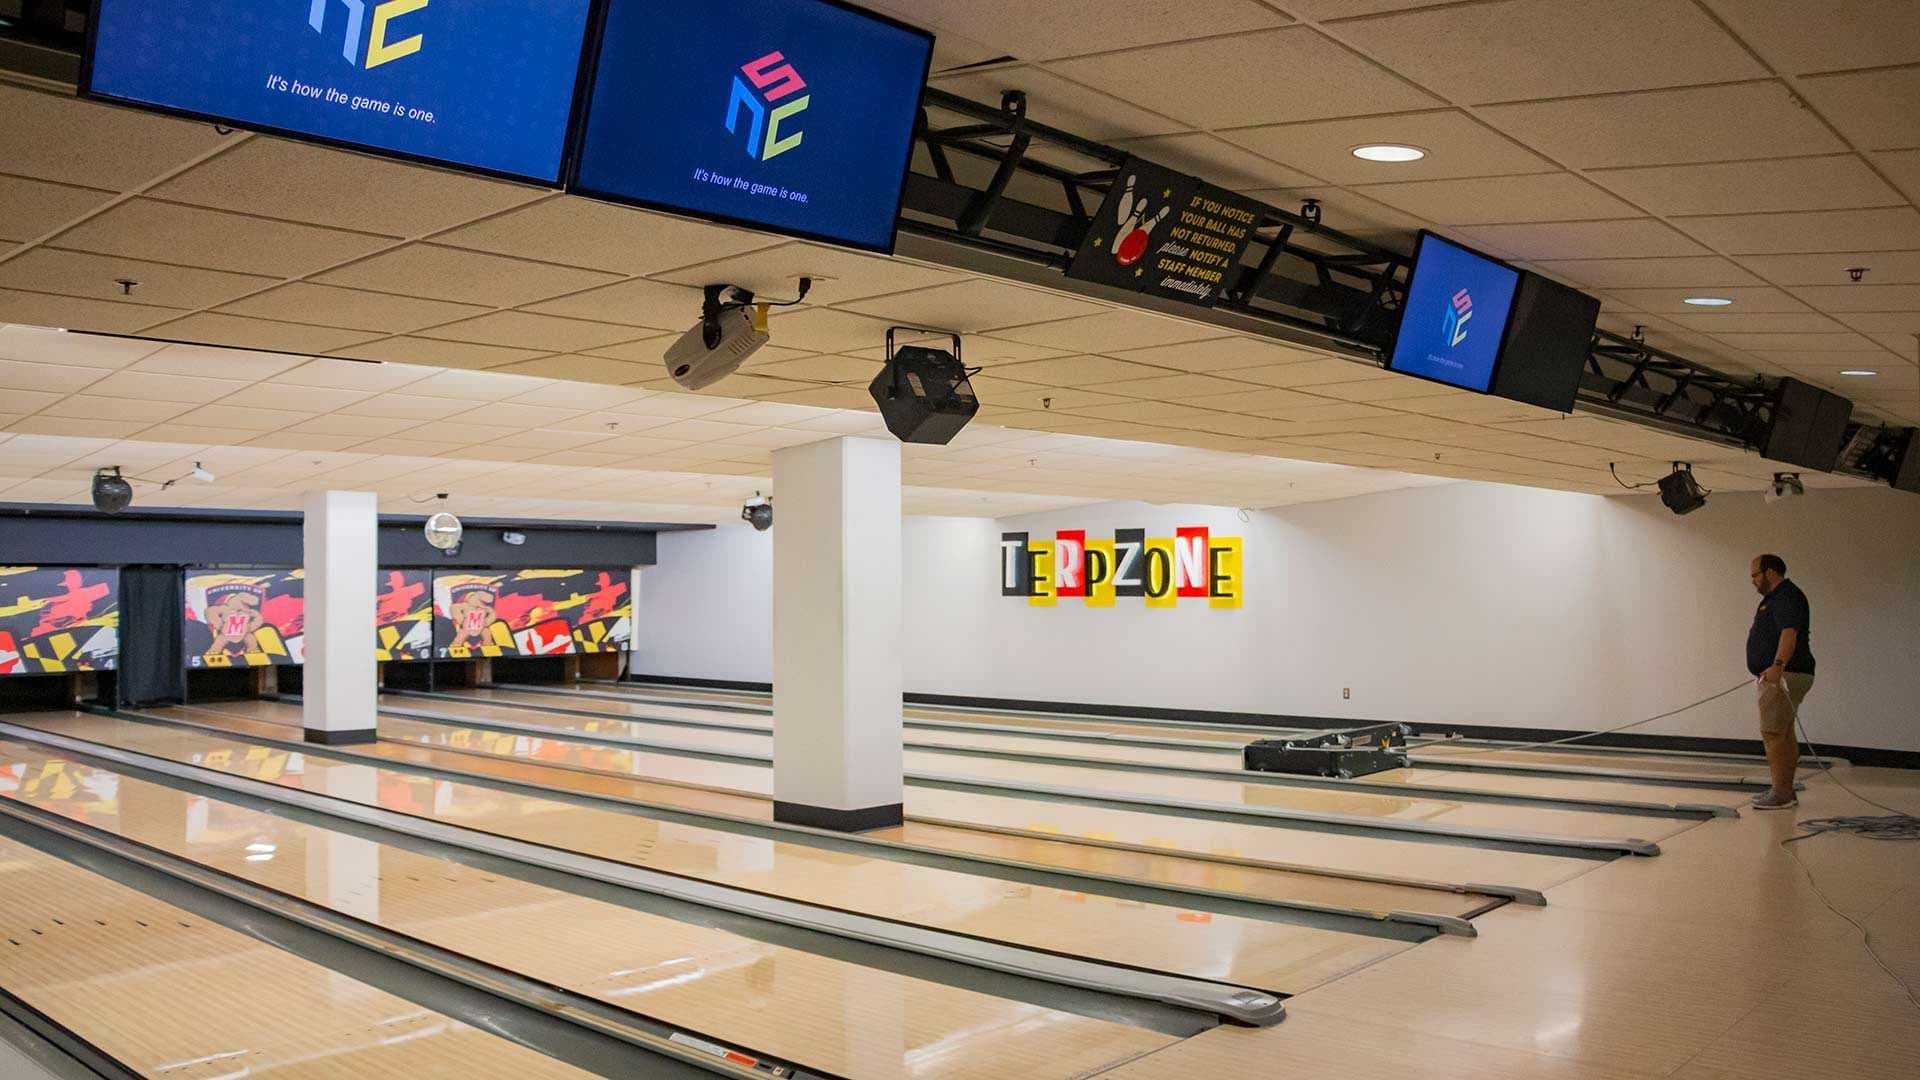 Staff member oils lanes at bowling alley